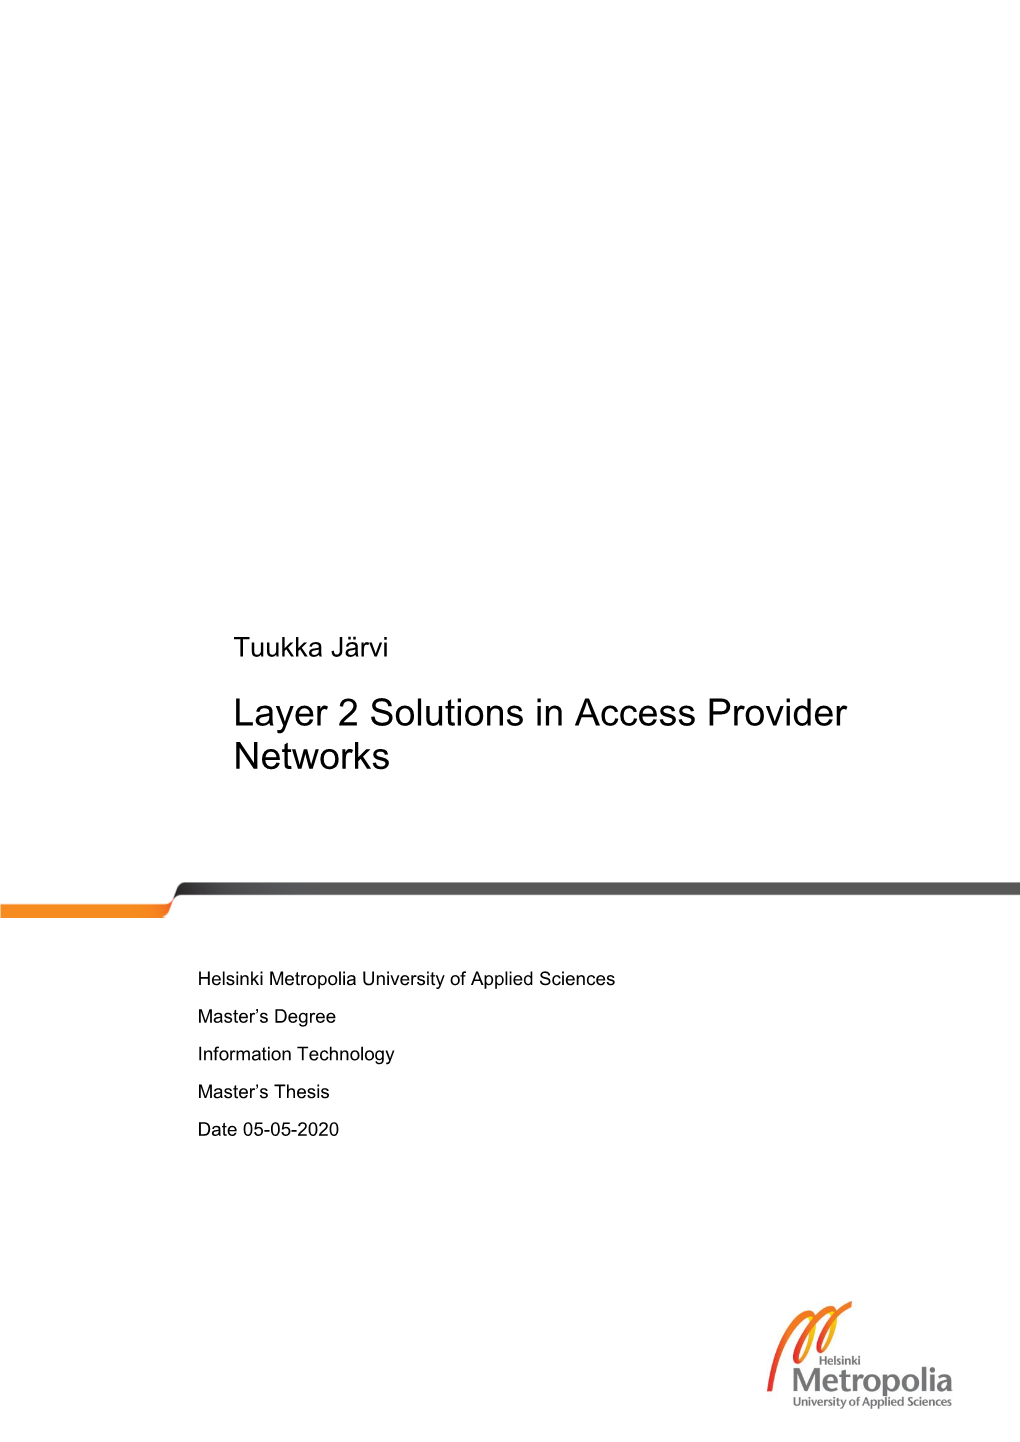 Layer 2 Solutions in Access Provider Networks